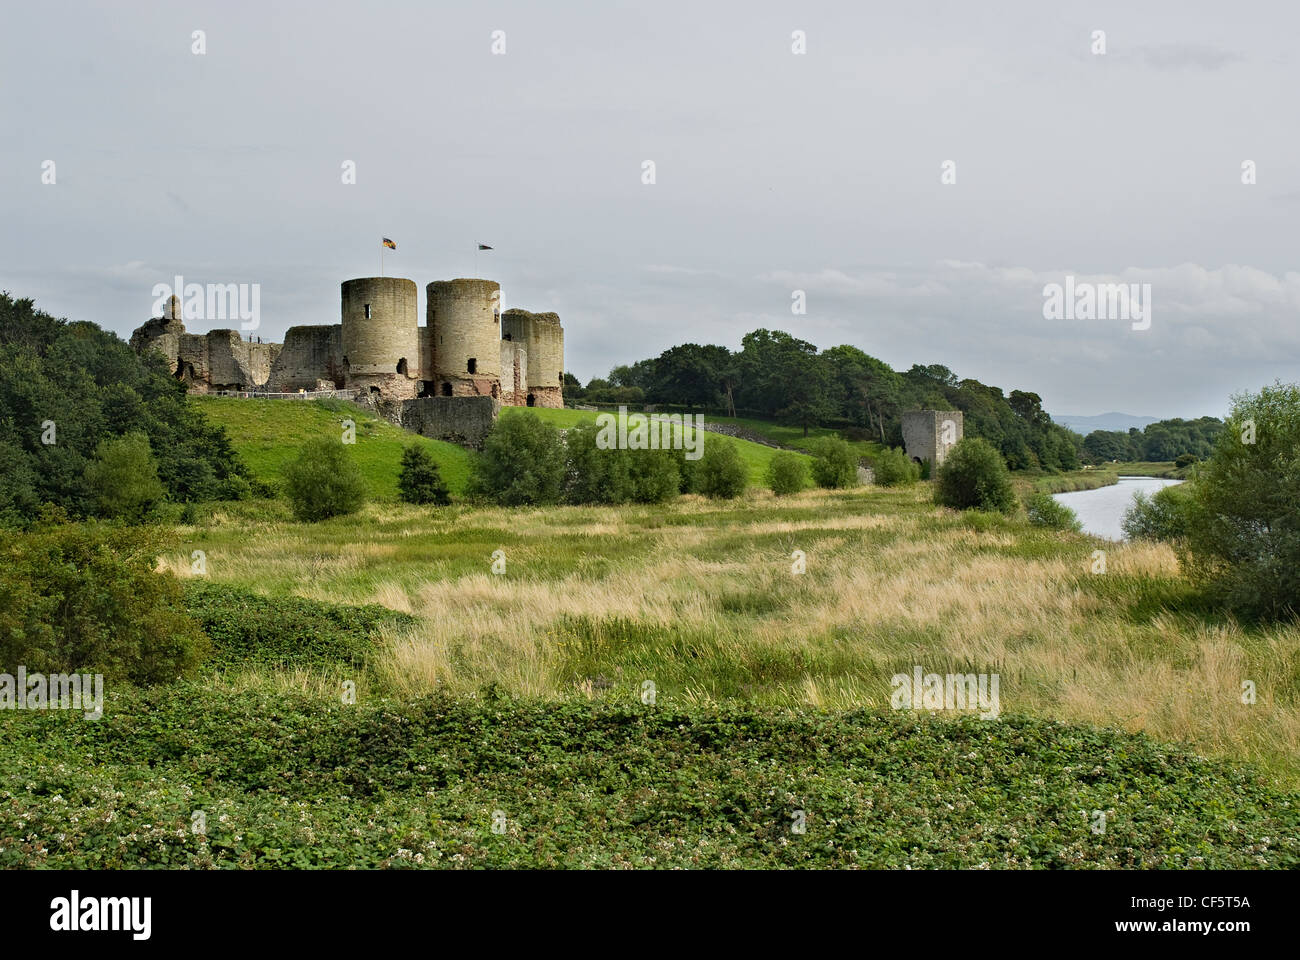 Rhuddlan Castle, built in the thirteenth century under the reign of King Edward l. Stock Photo